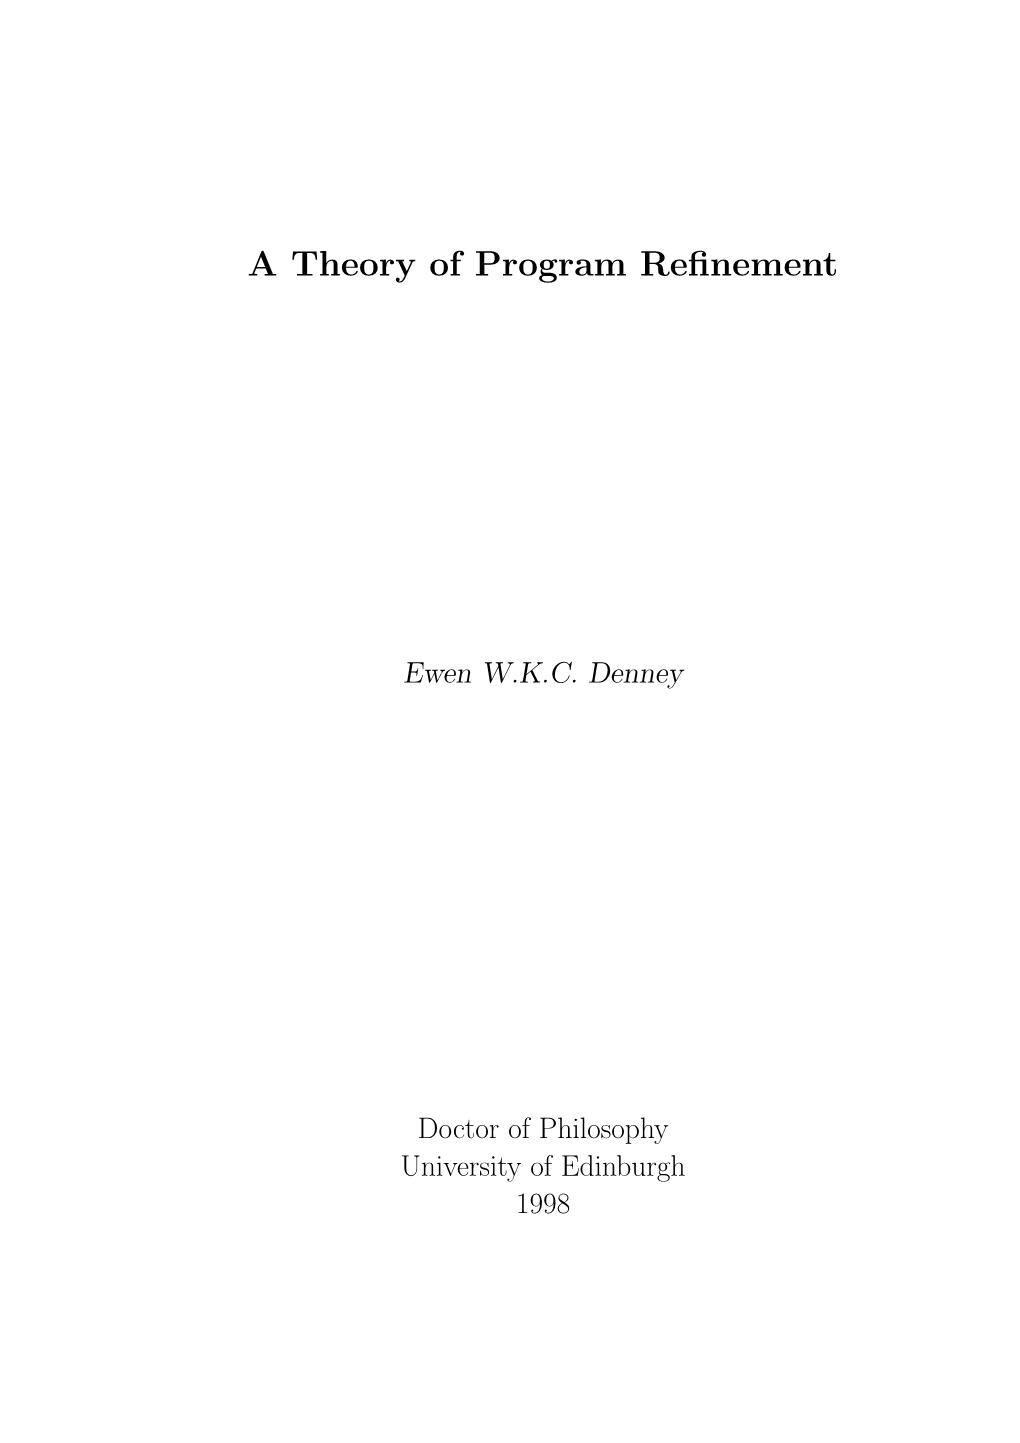 A Theory of Program Refinement